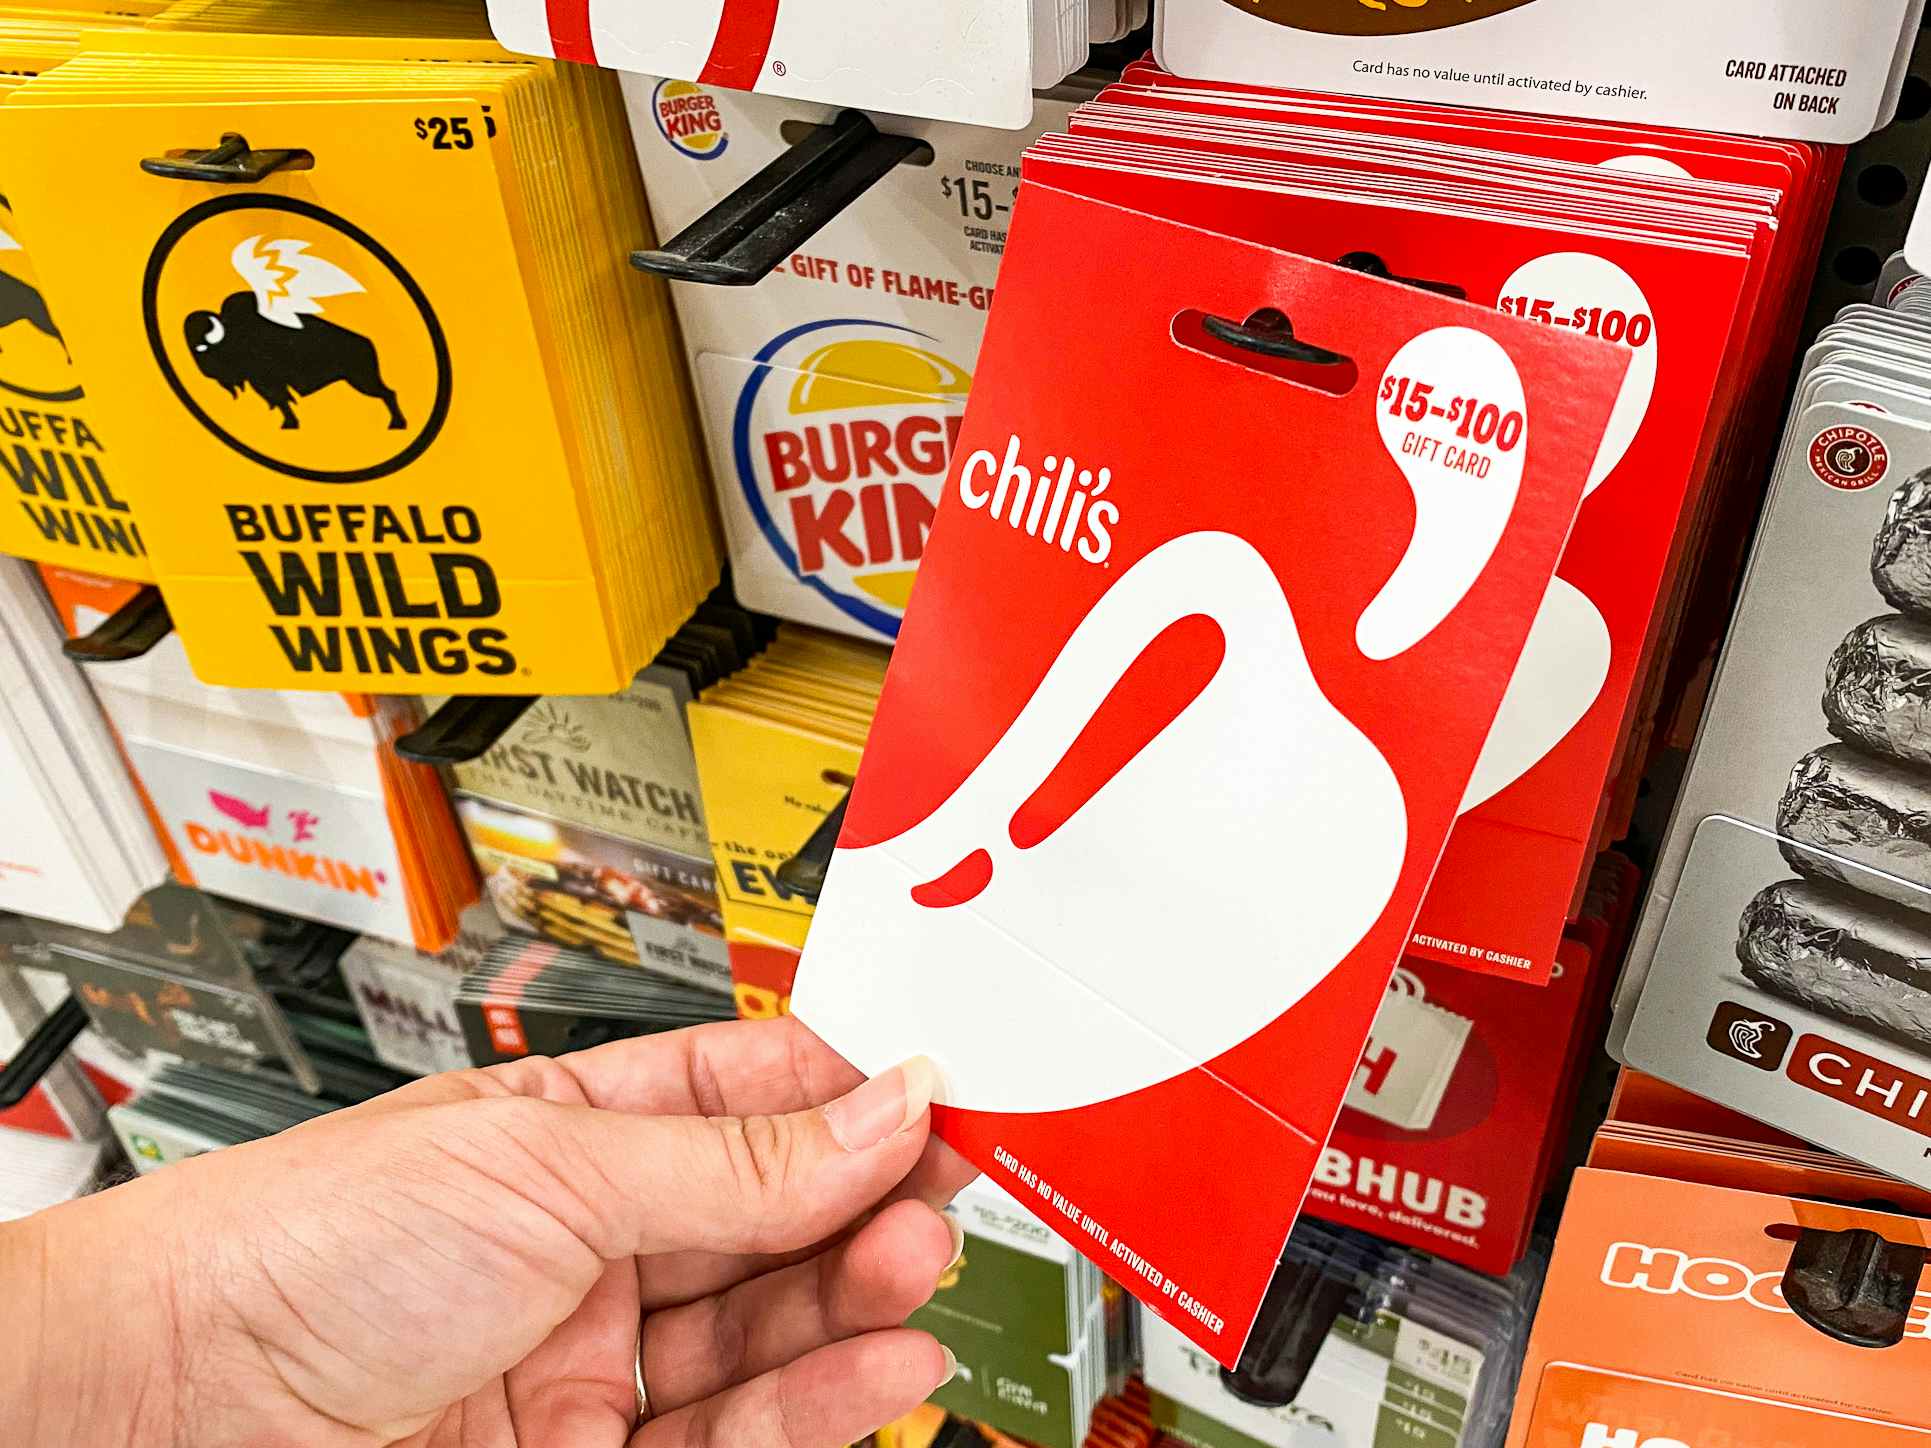 A person's hand taking a Chili's gift card from a display of gift cards at Walmart.